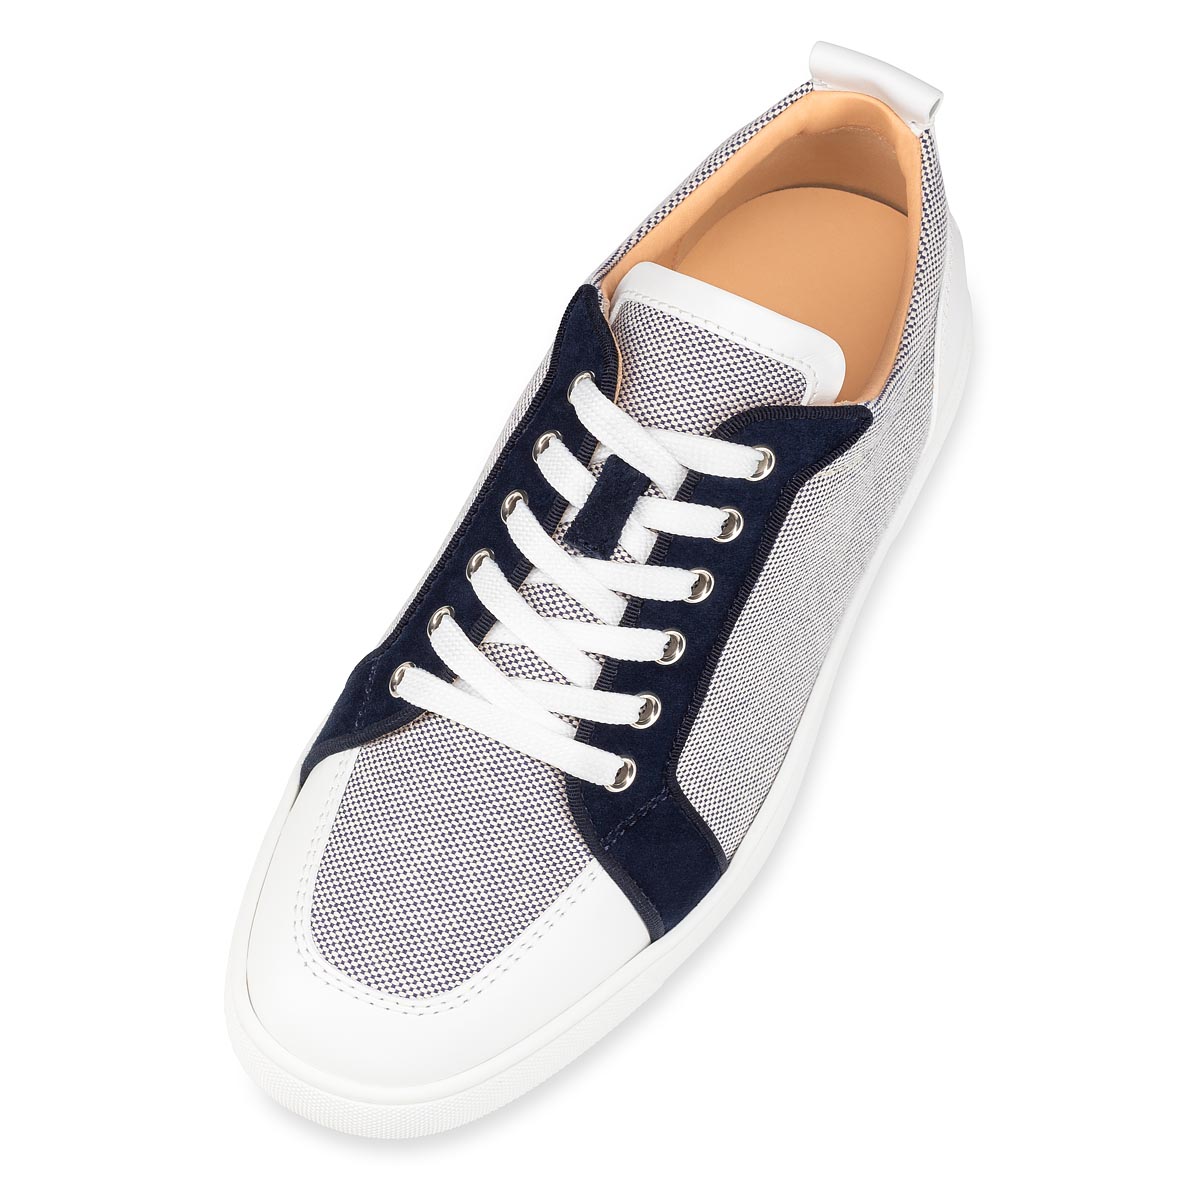 Shop Christian Louboutin Rantulow Suede Plain Leather Sneakers by  HappyLifeStyle